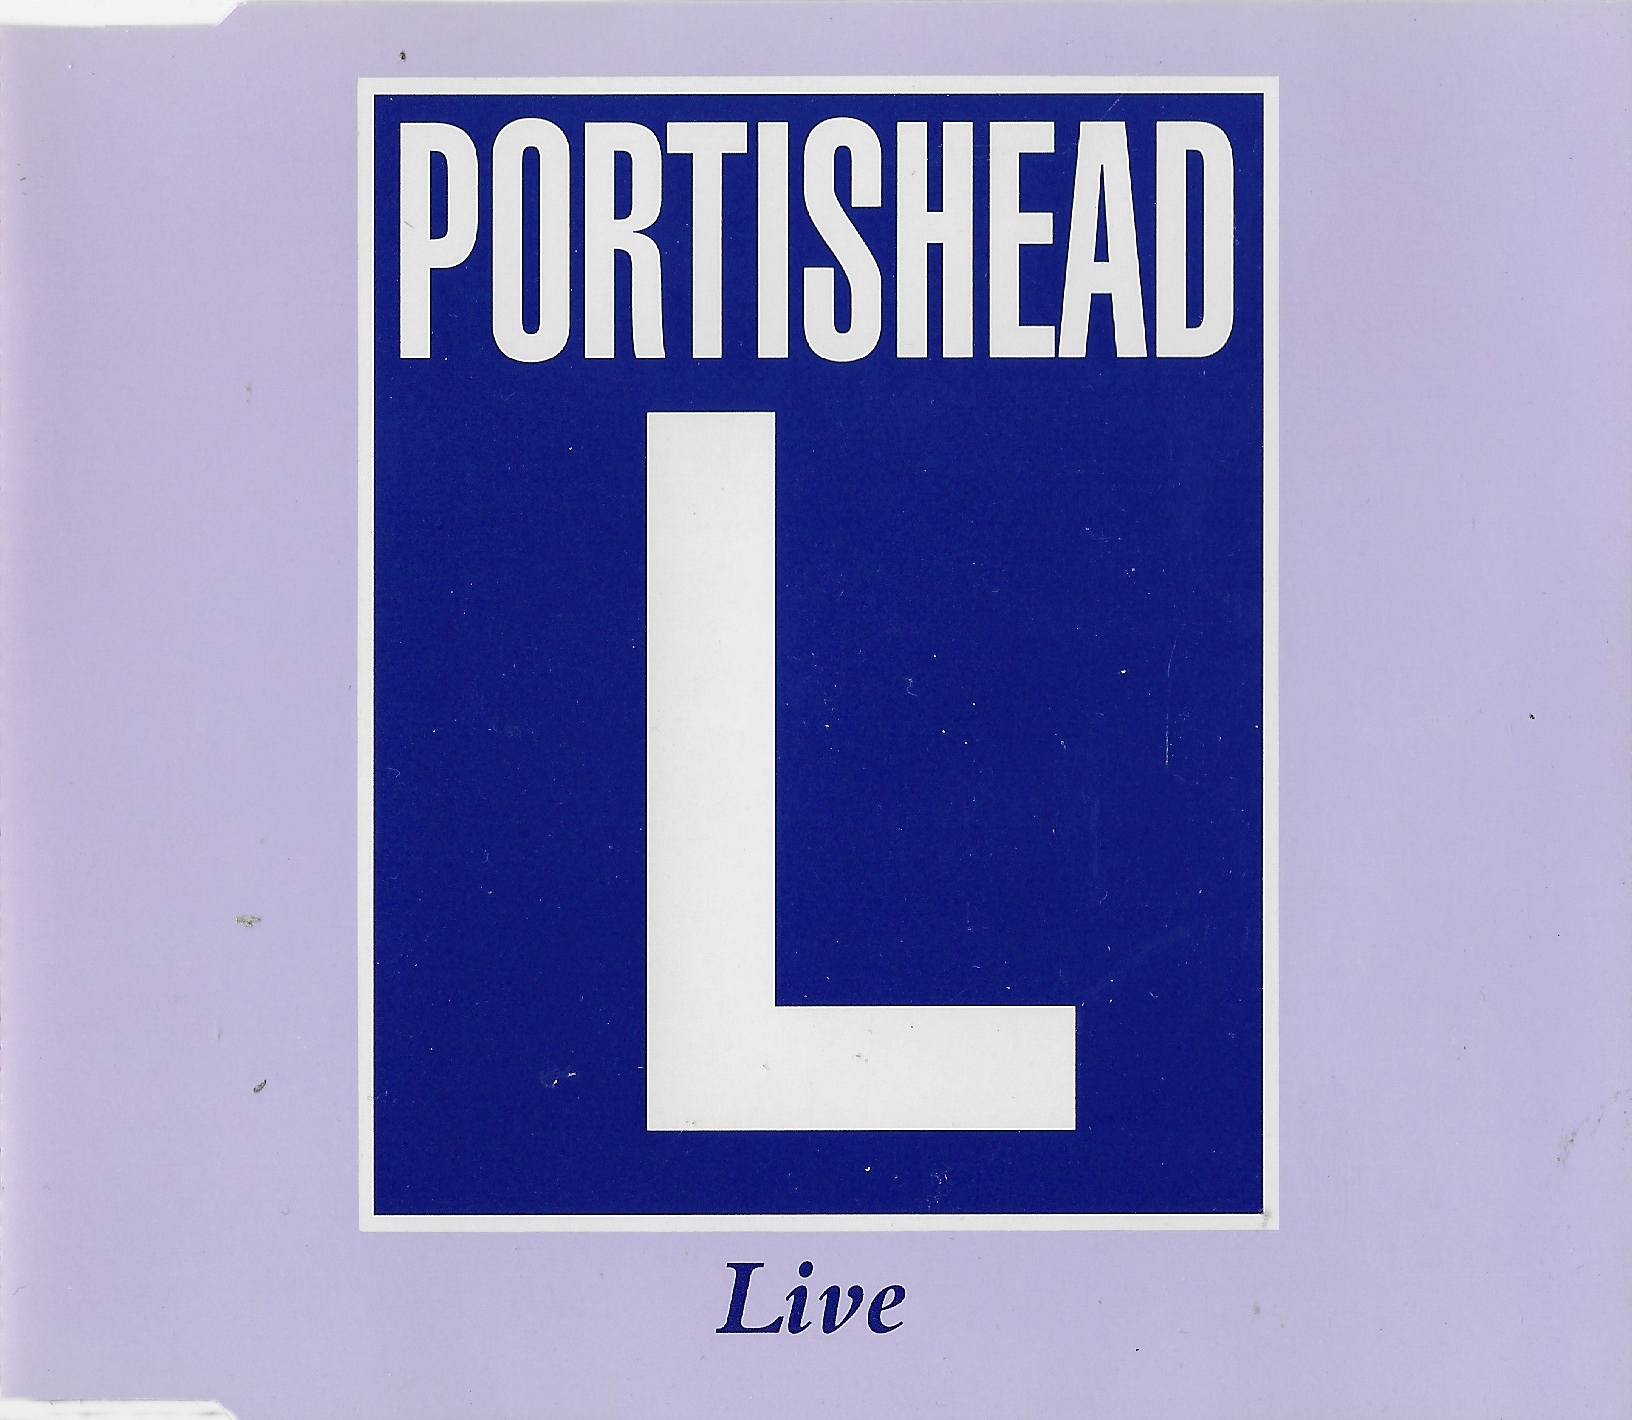 Picture of 850273 - 2 Portishead live by artist Portishead  